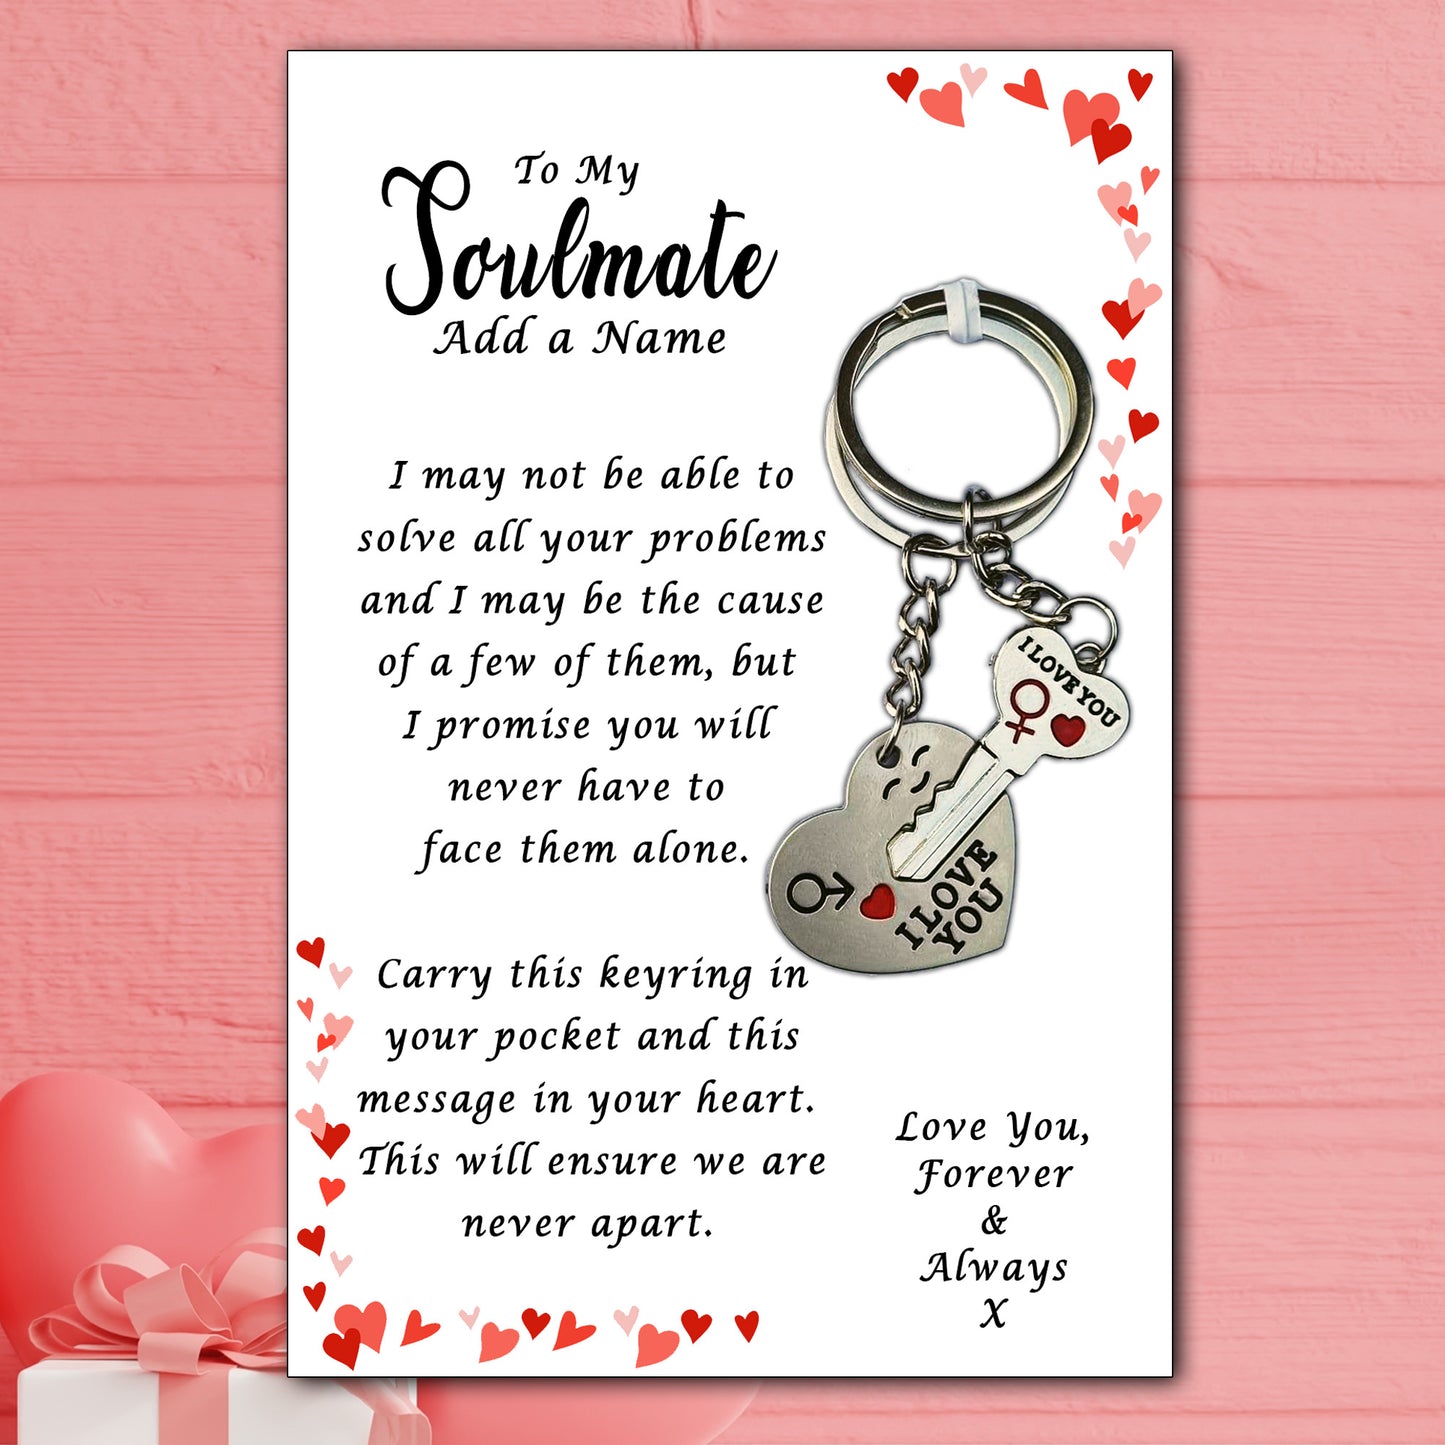 I Love You His & Hers Keyrings and Personalised Soulmate Card